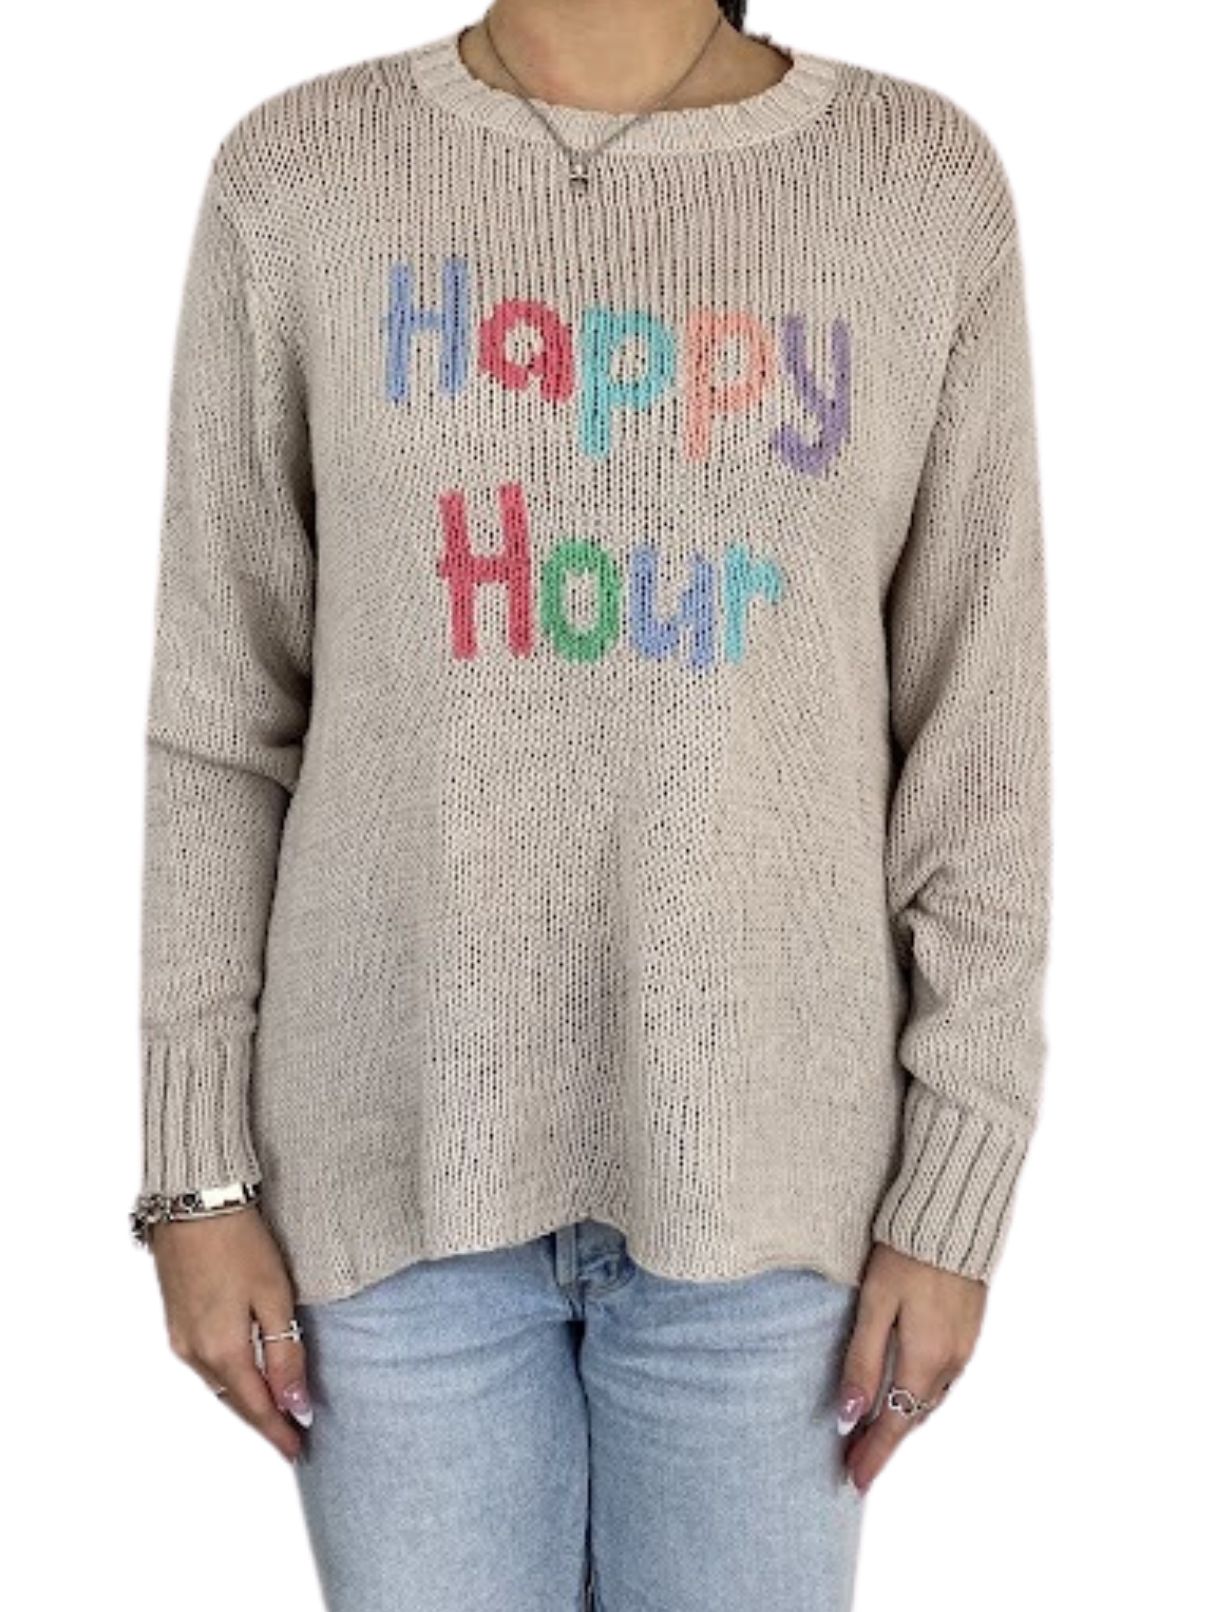 The Happy Hour Pullover